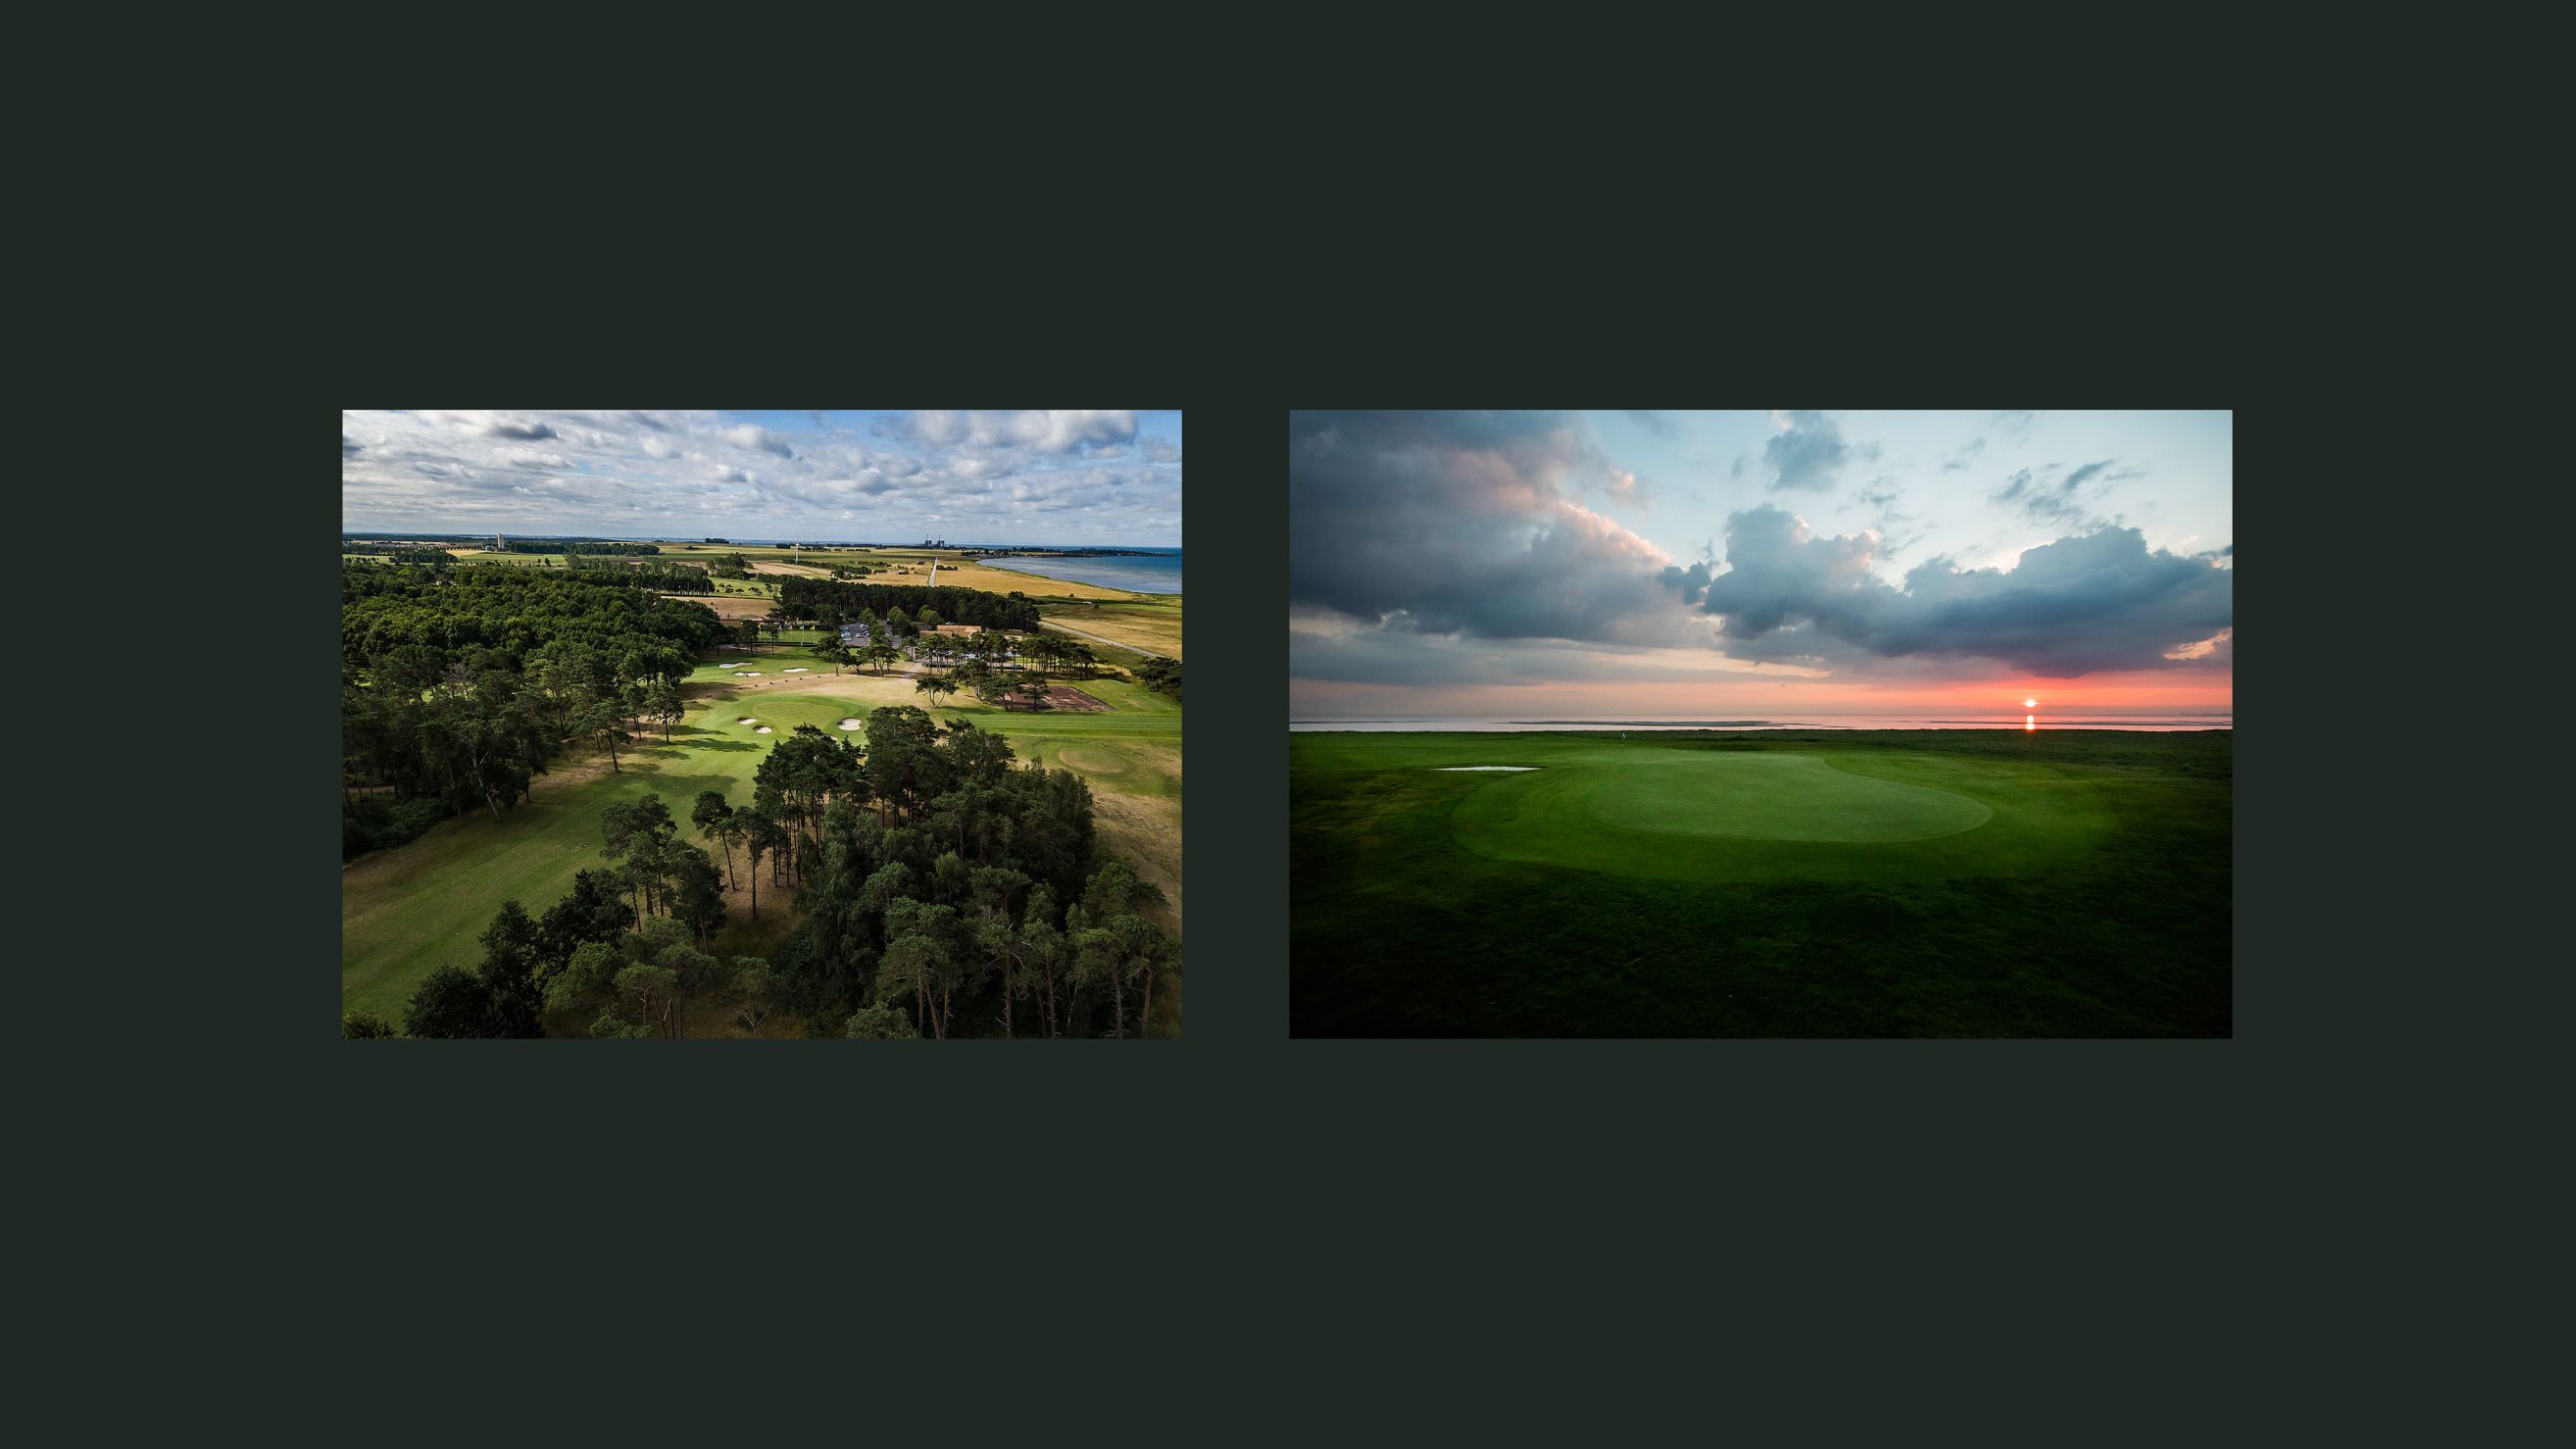 Two images of golf courses.